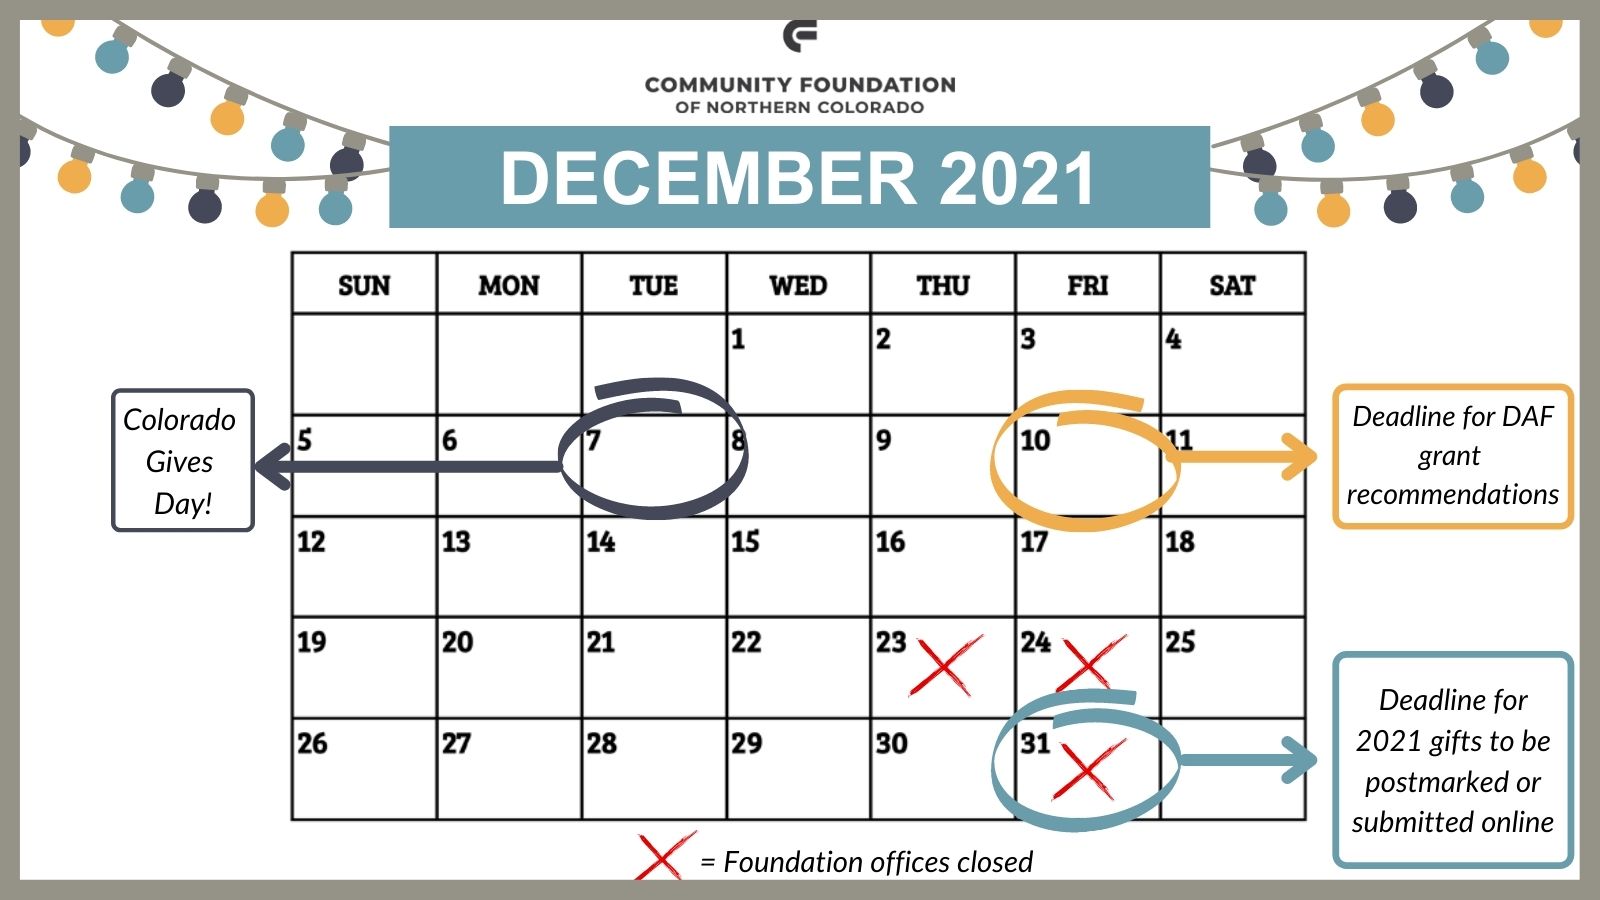 A calendar showing Colorado Gives Day on December 7, the Deadline for DAF grant recommendations on December 10th, and the Deadline for 2021 gifts to be postmarked or submitted online on December 31. The Foundation will be closed December 23rd, 24th and 31st.